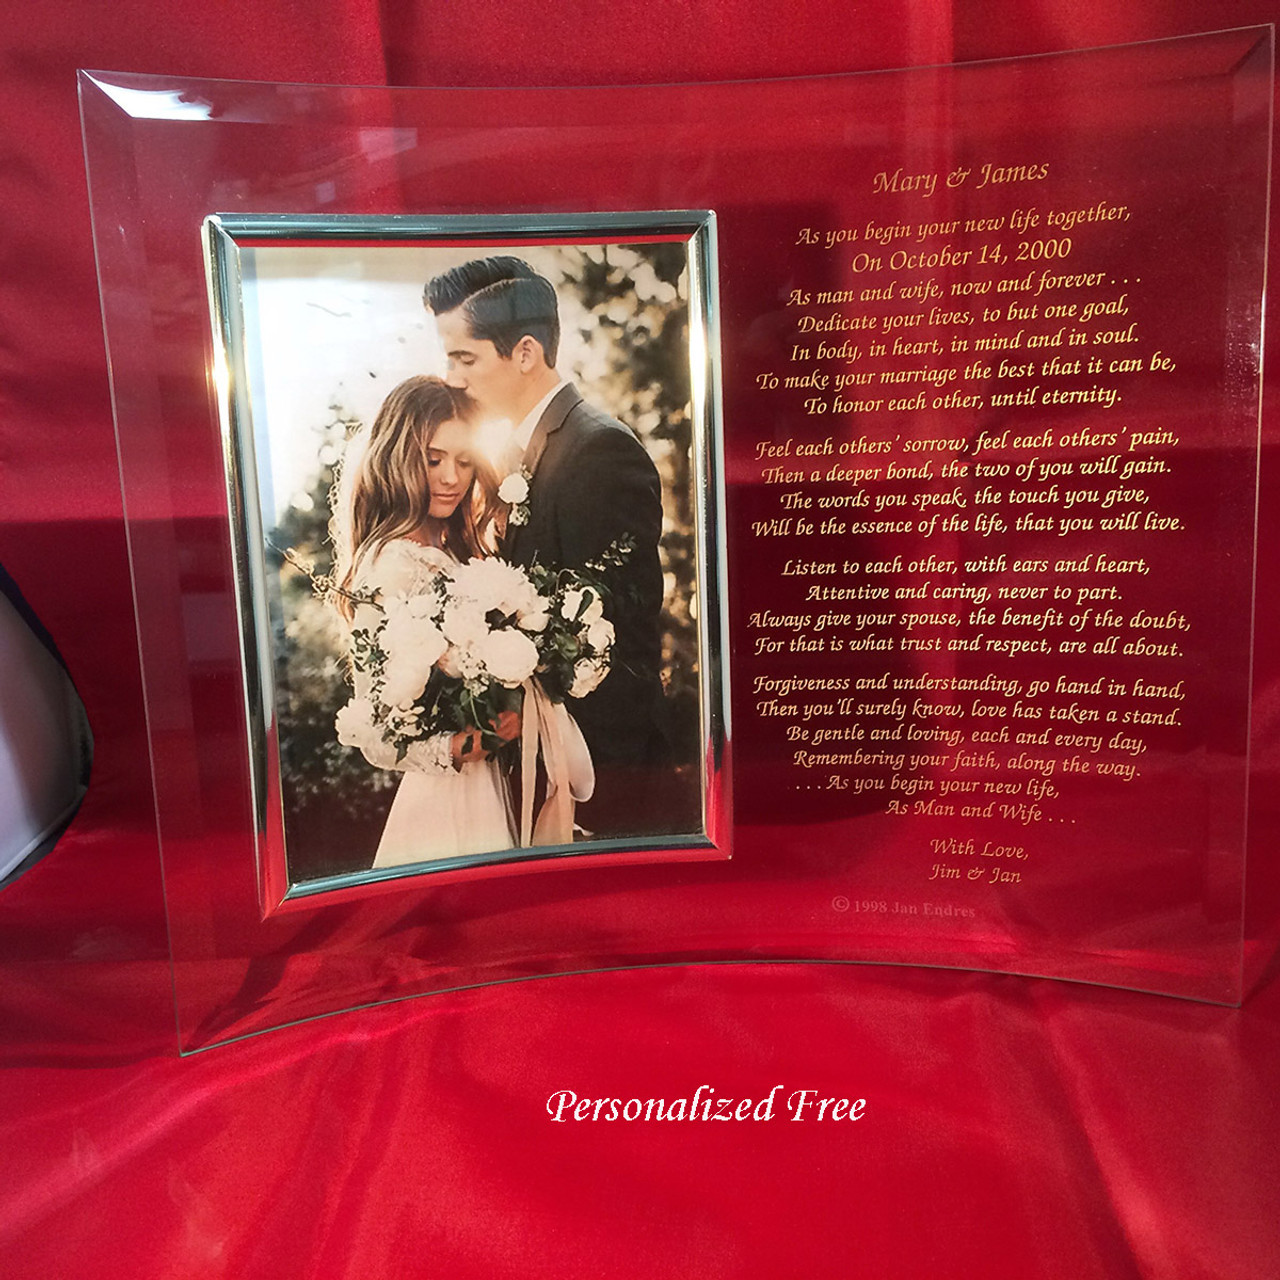 Best Wedding Gifts, Gifts for Couples, Personalized Wedding Gifts